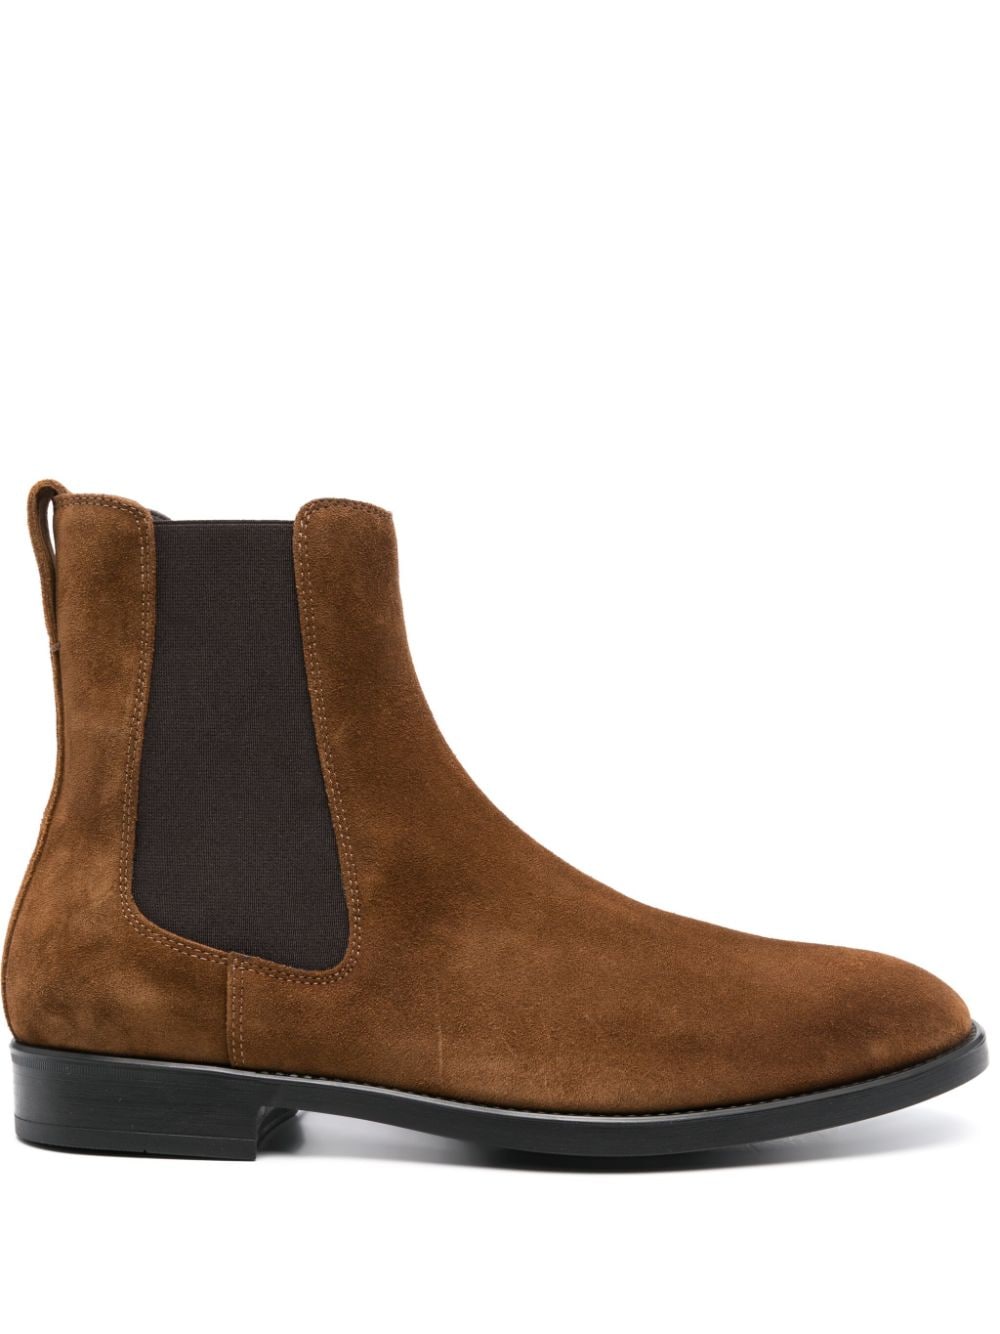 TOM FORD Robert suede chelsea boots - Brown von TOM FORD